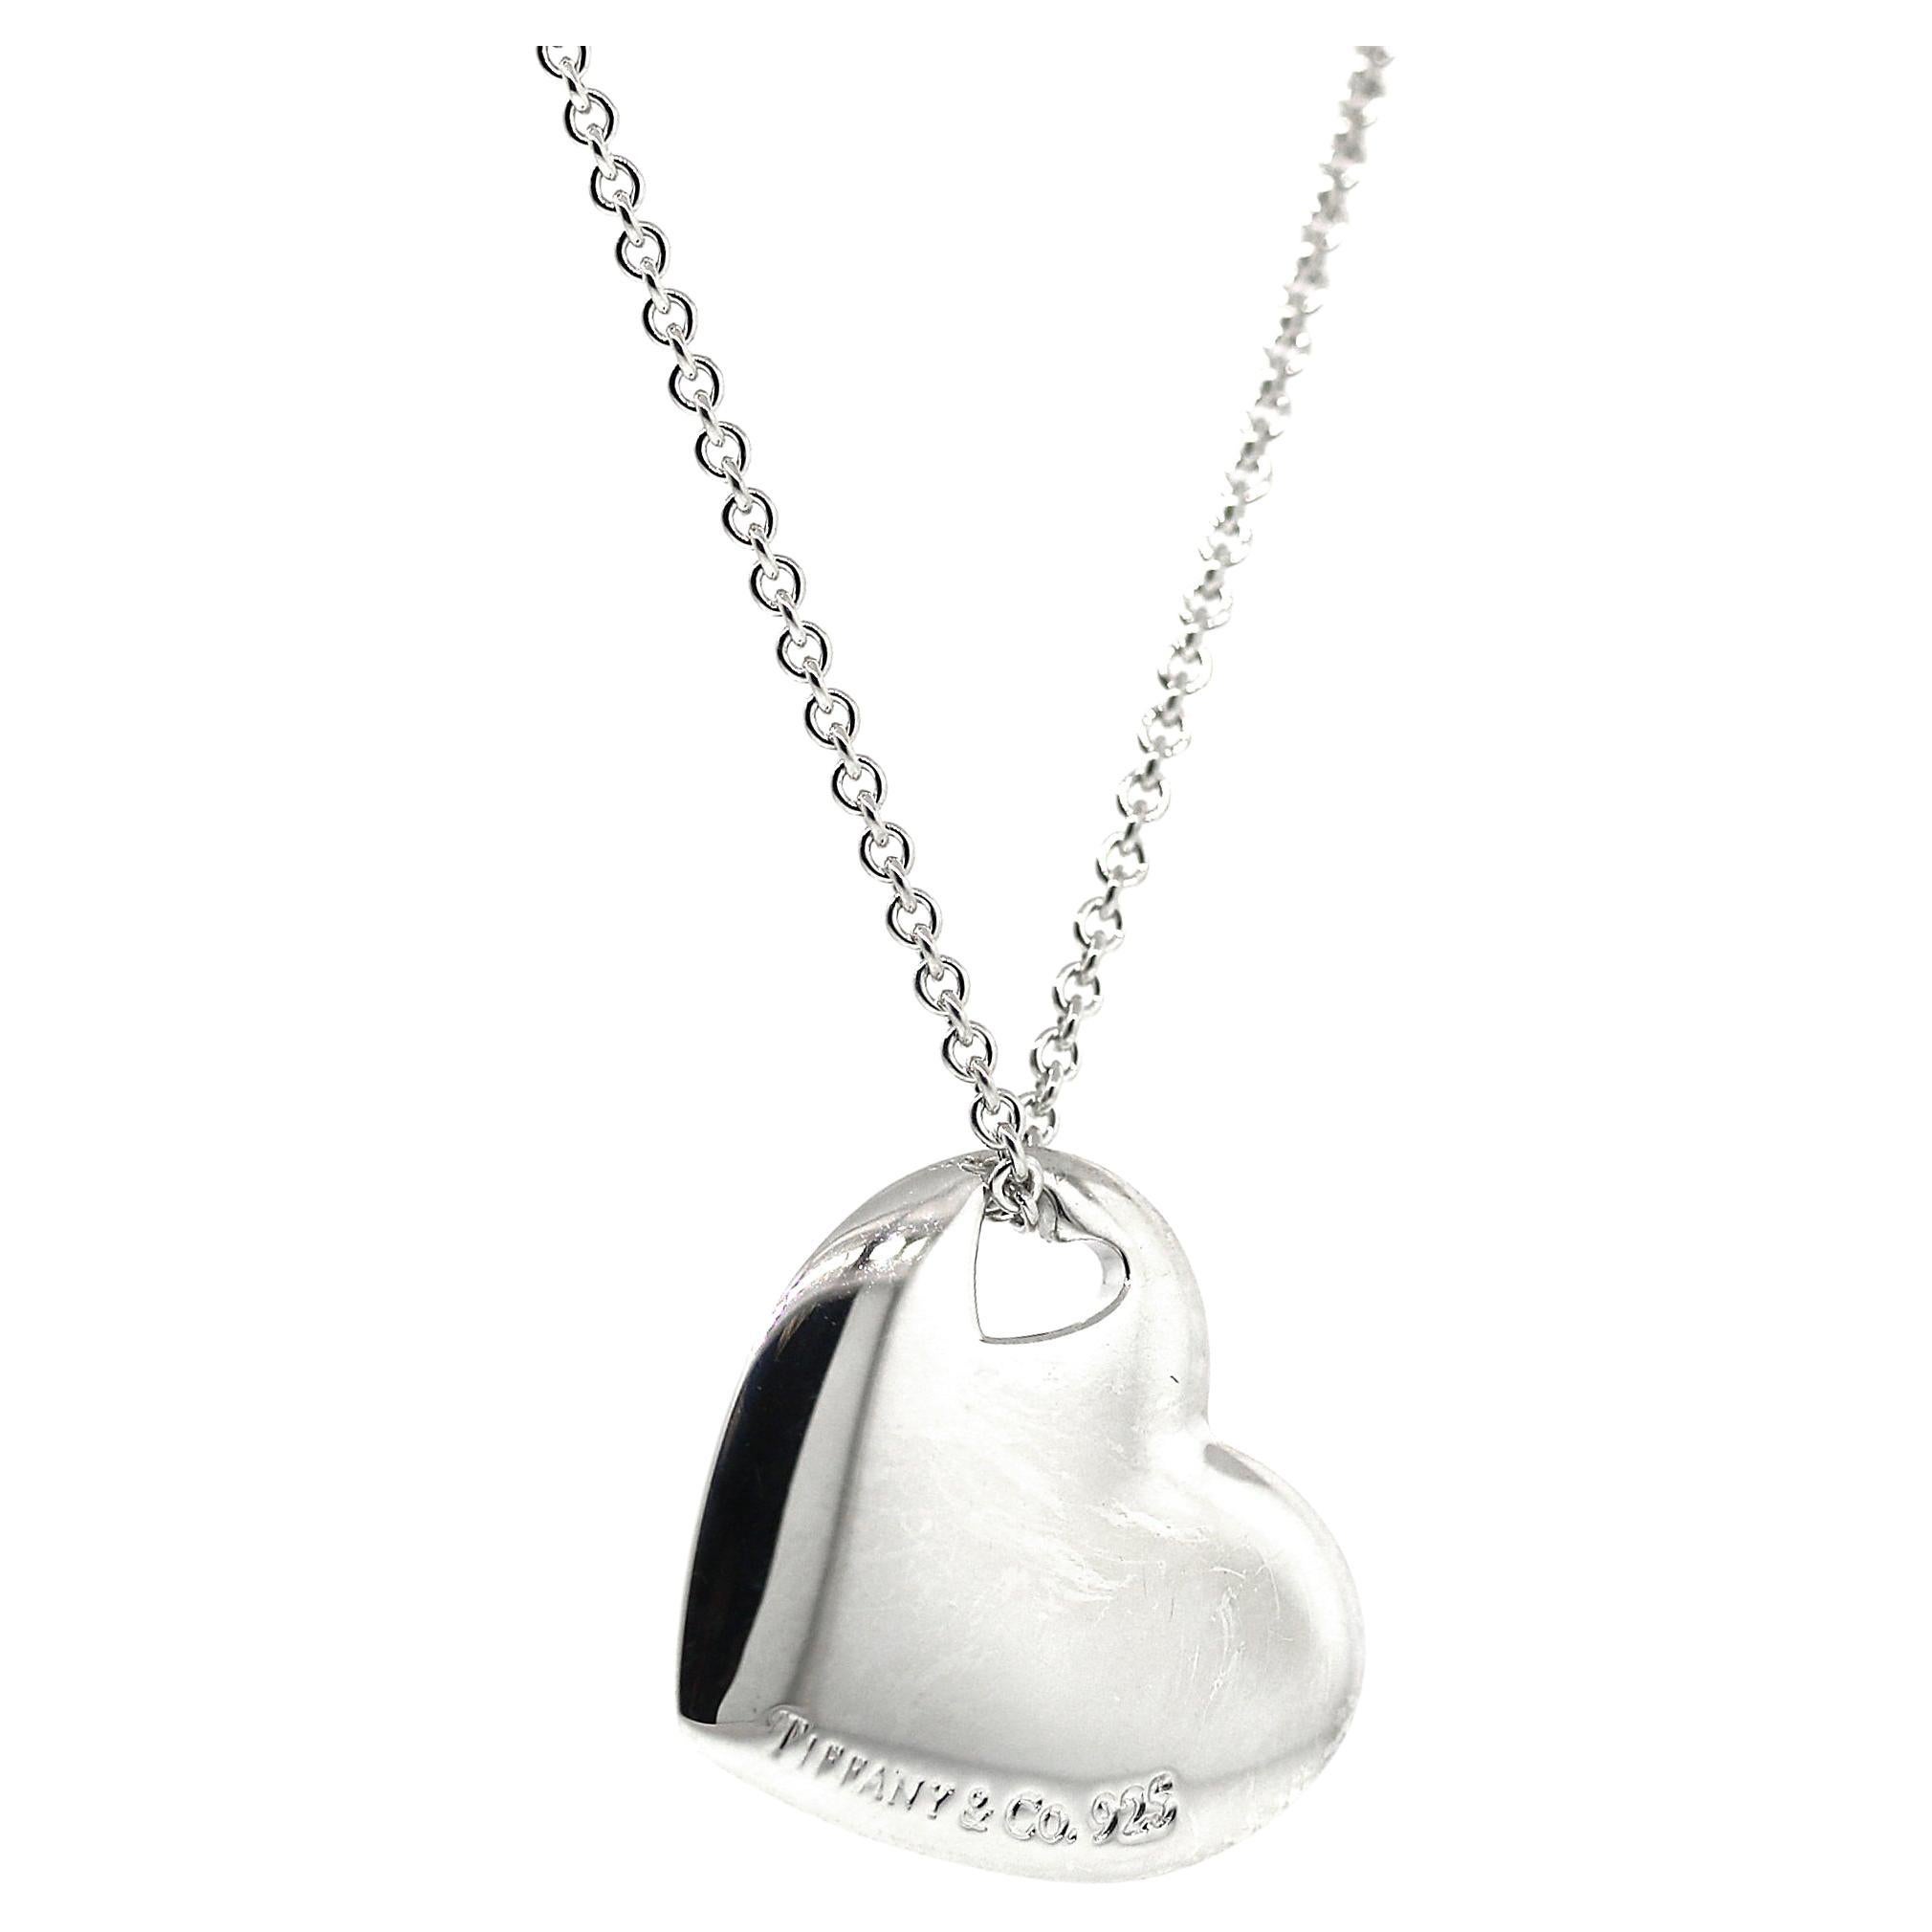 Tiffany and Co. Sterling Silver Cutout Heart Pendant Necklace